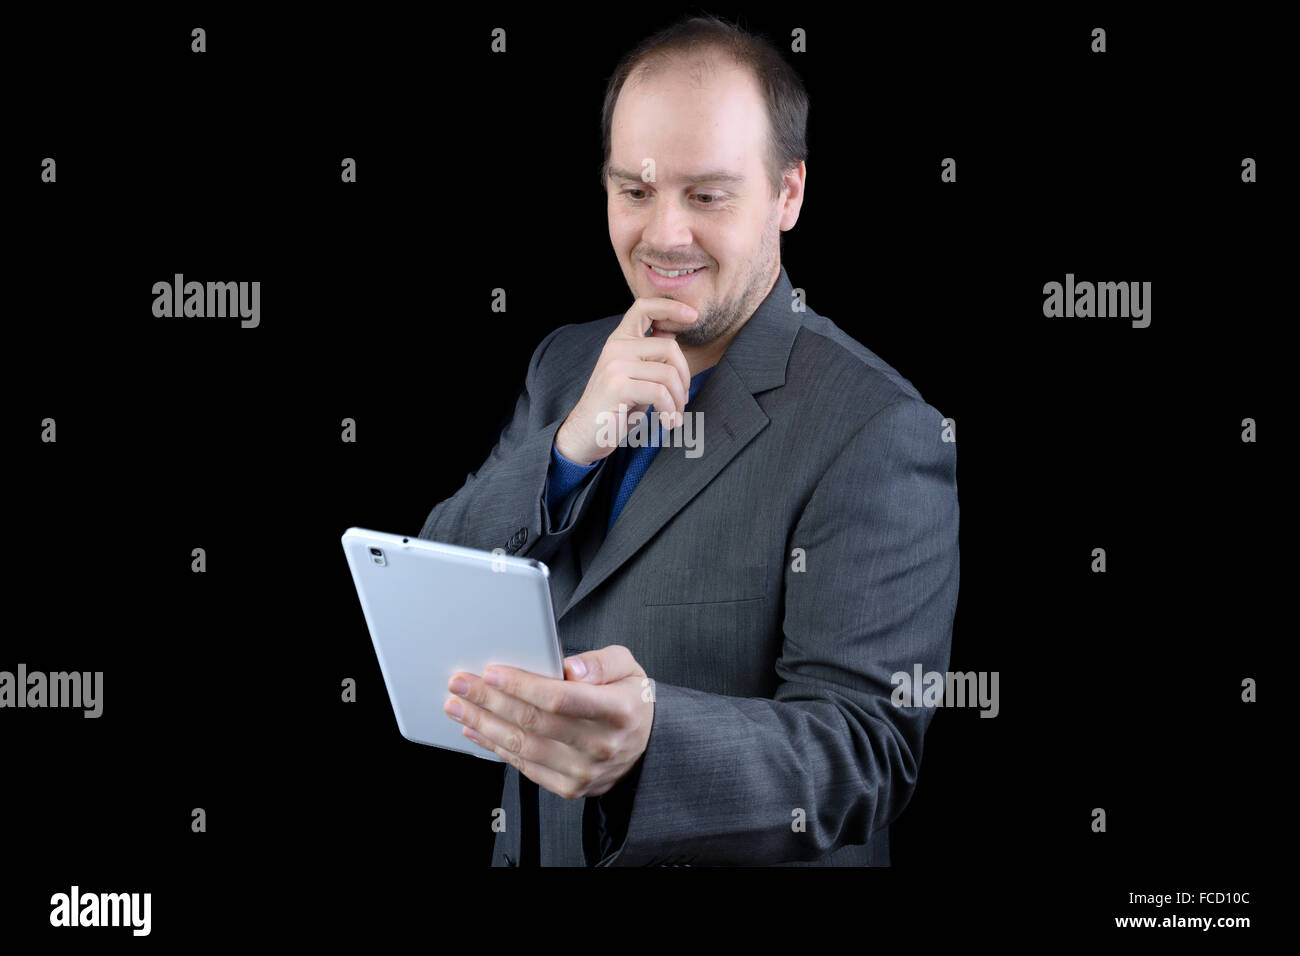 young man dark gray suit smiling holding tablet Stock Photo